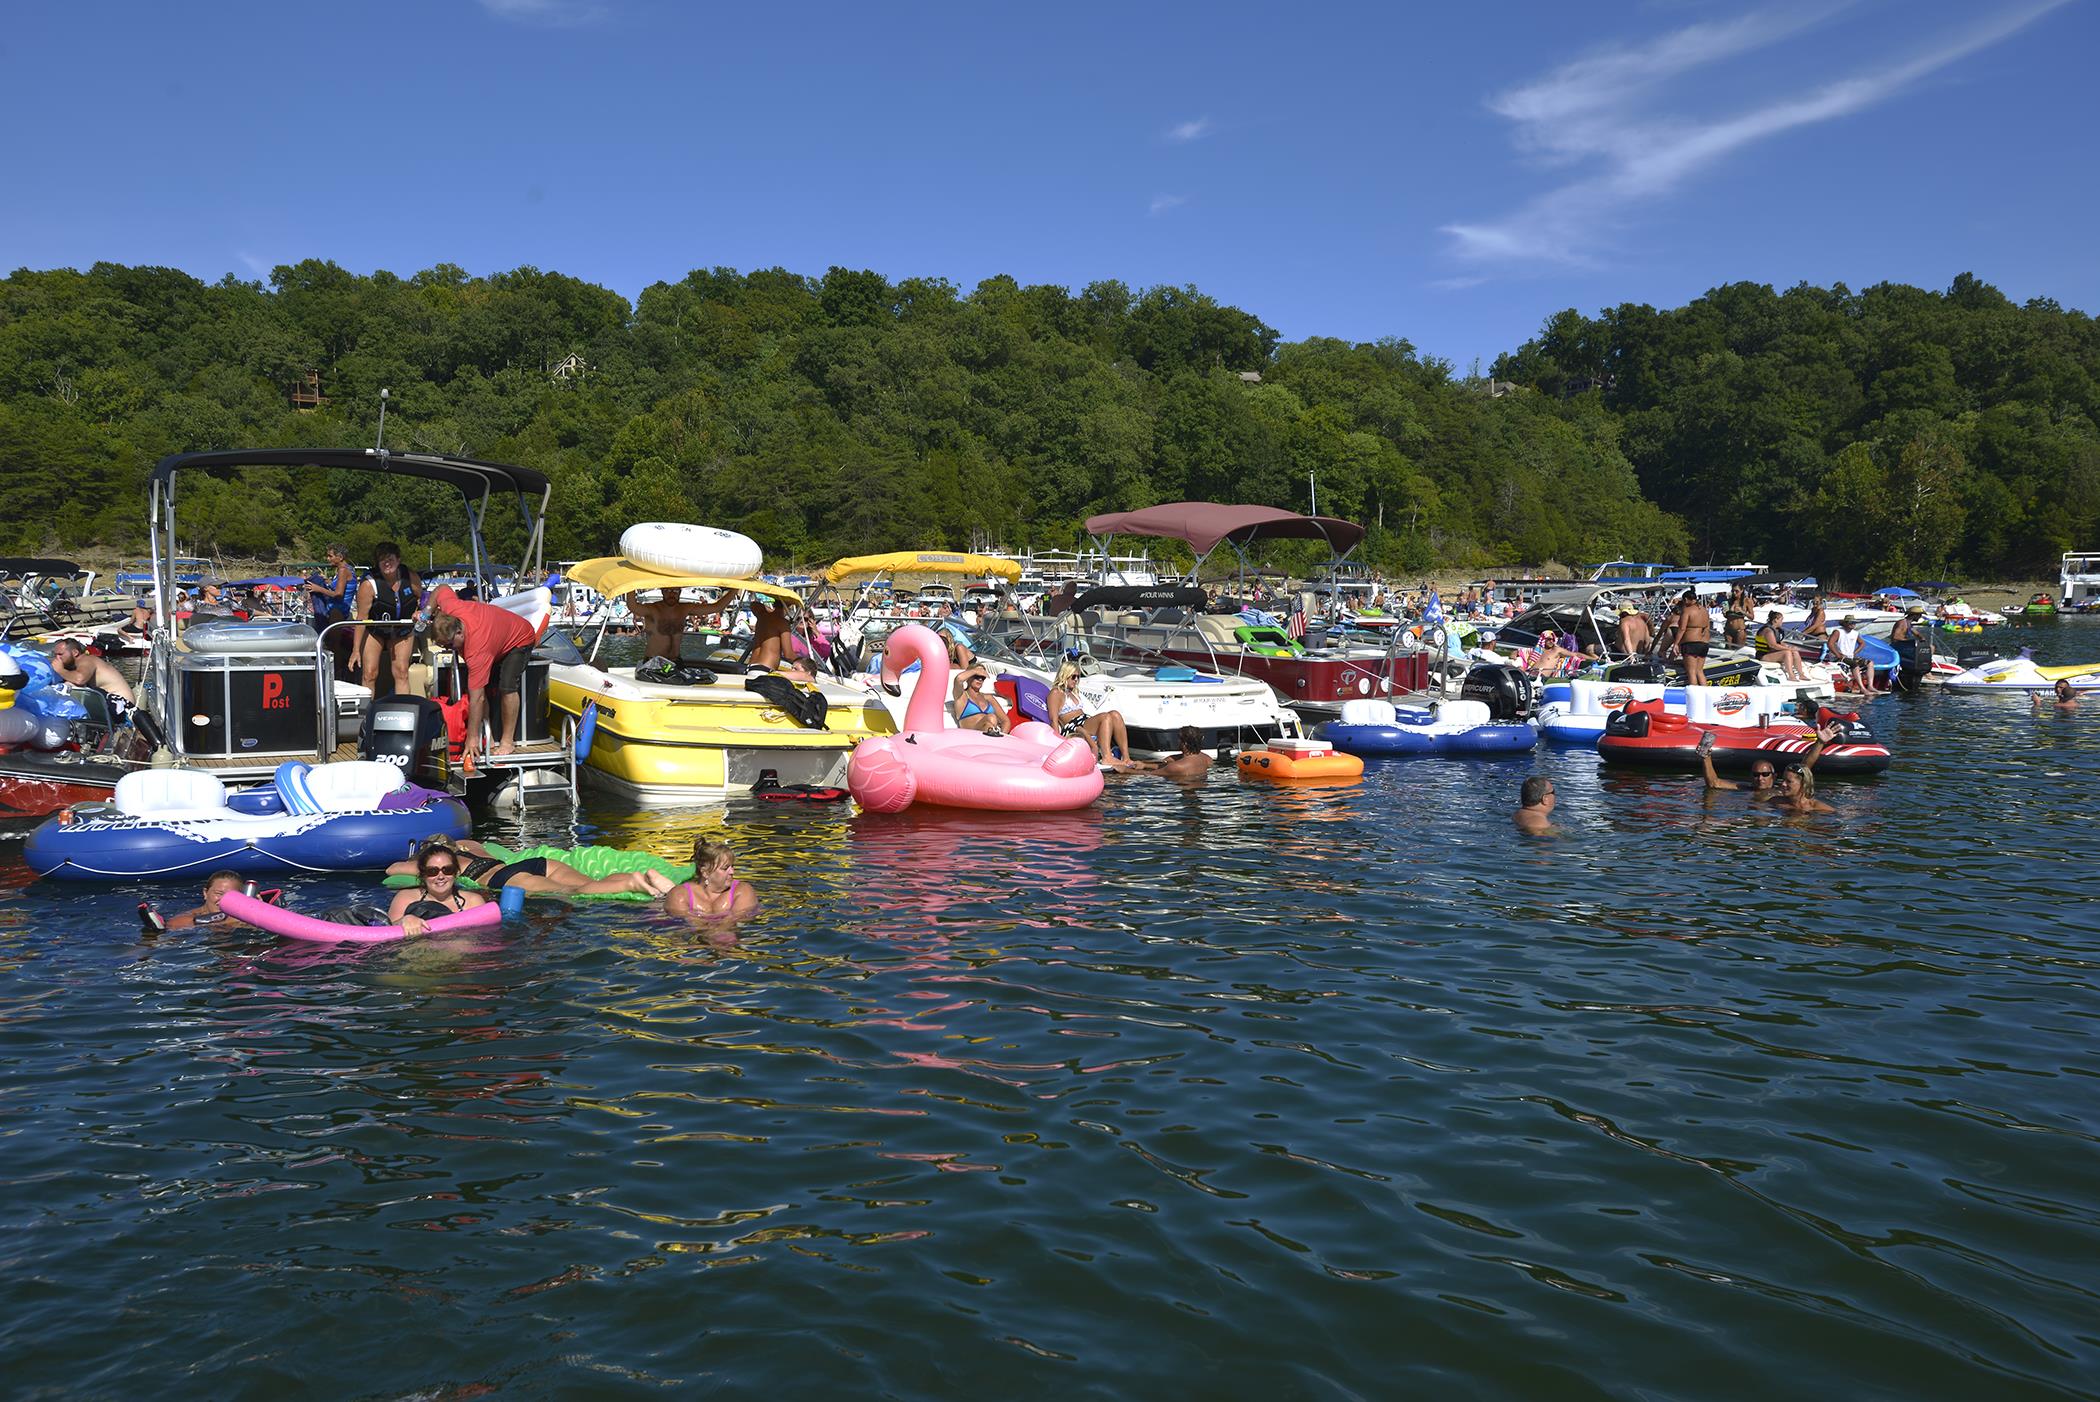 Park Rangers keep boaters safe during World’s largest RaftUp at Lake